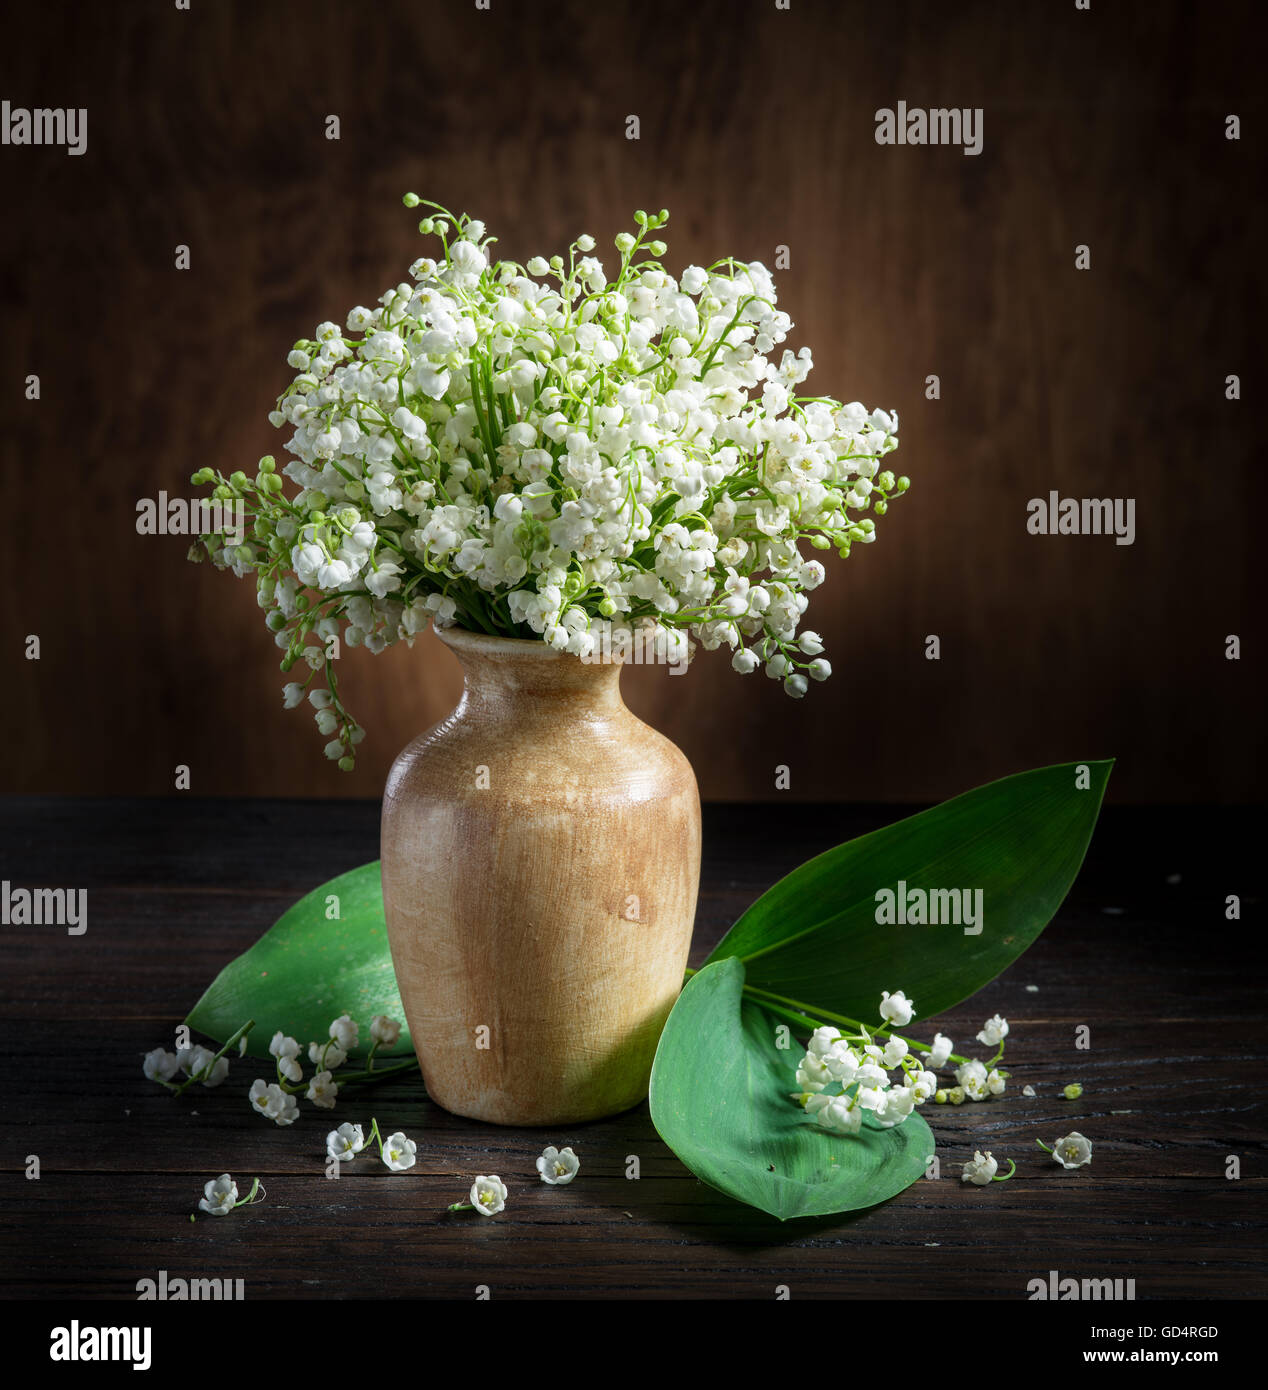 Lily of the valley bouquet on the wooden table. Stock Photo